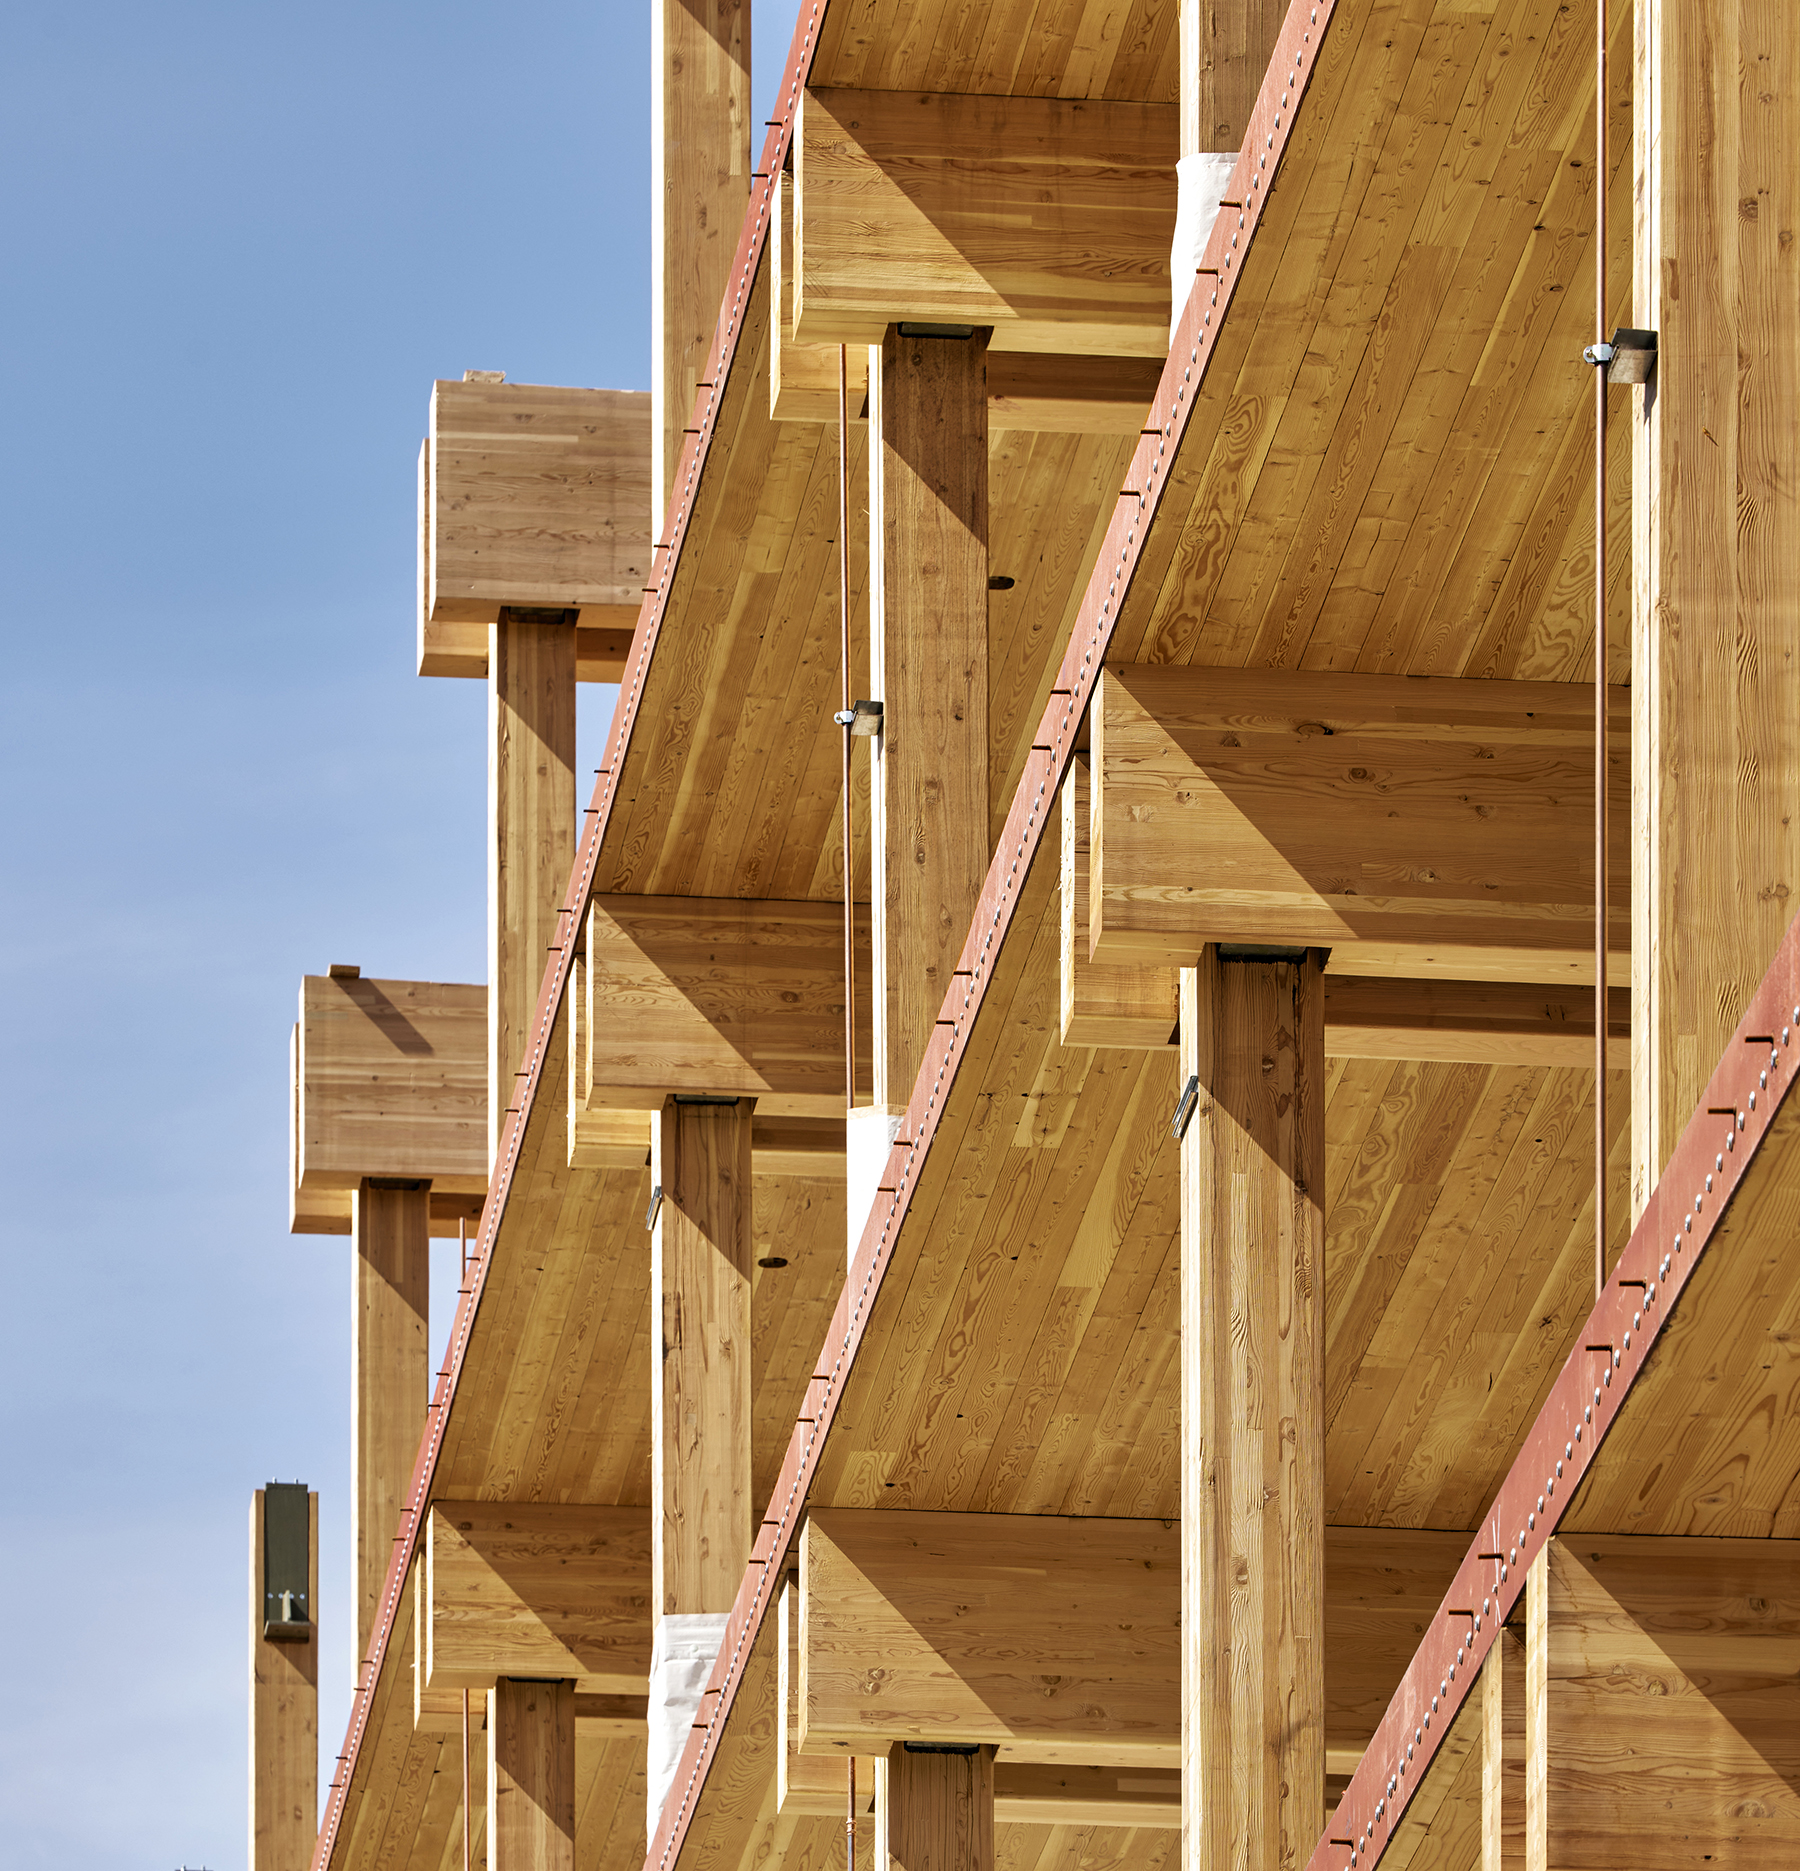 Net-zero timber building takes root in San Mateo County, California